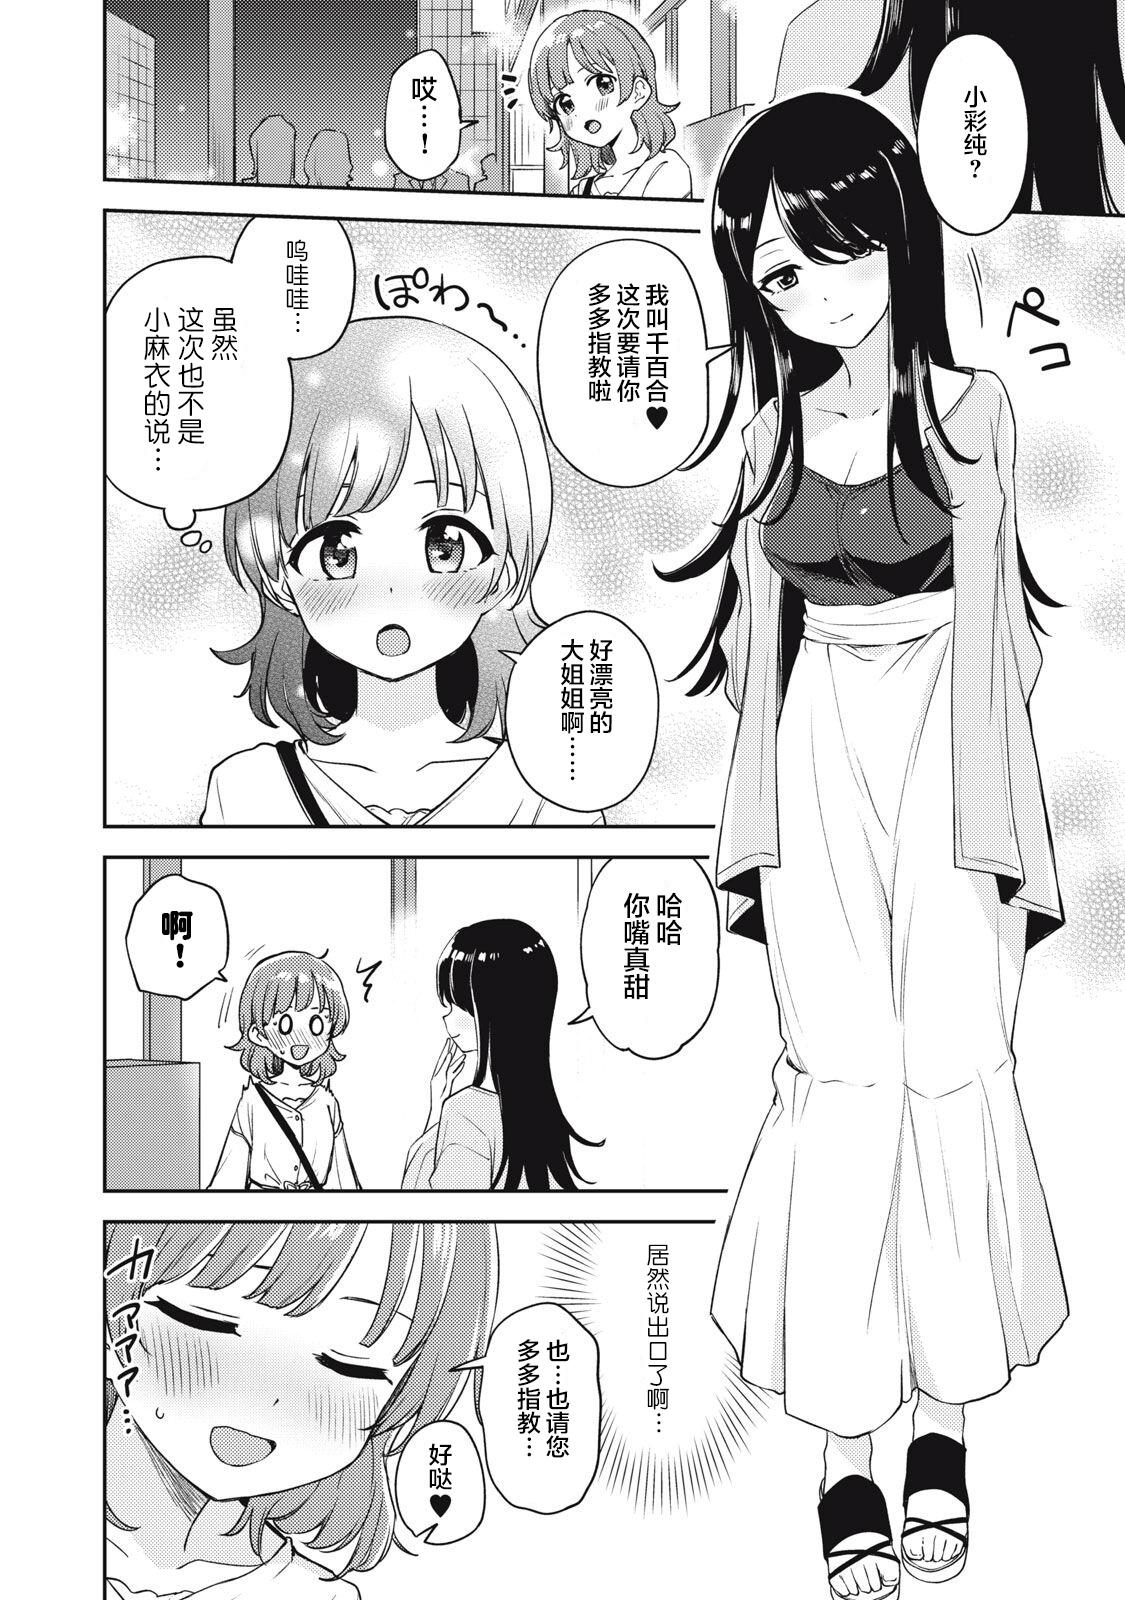 Cavala Asumi-chan Is Interested In Lesbian Brothels! Extra Episode Moan - Page 2